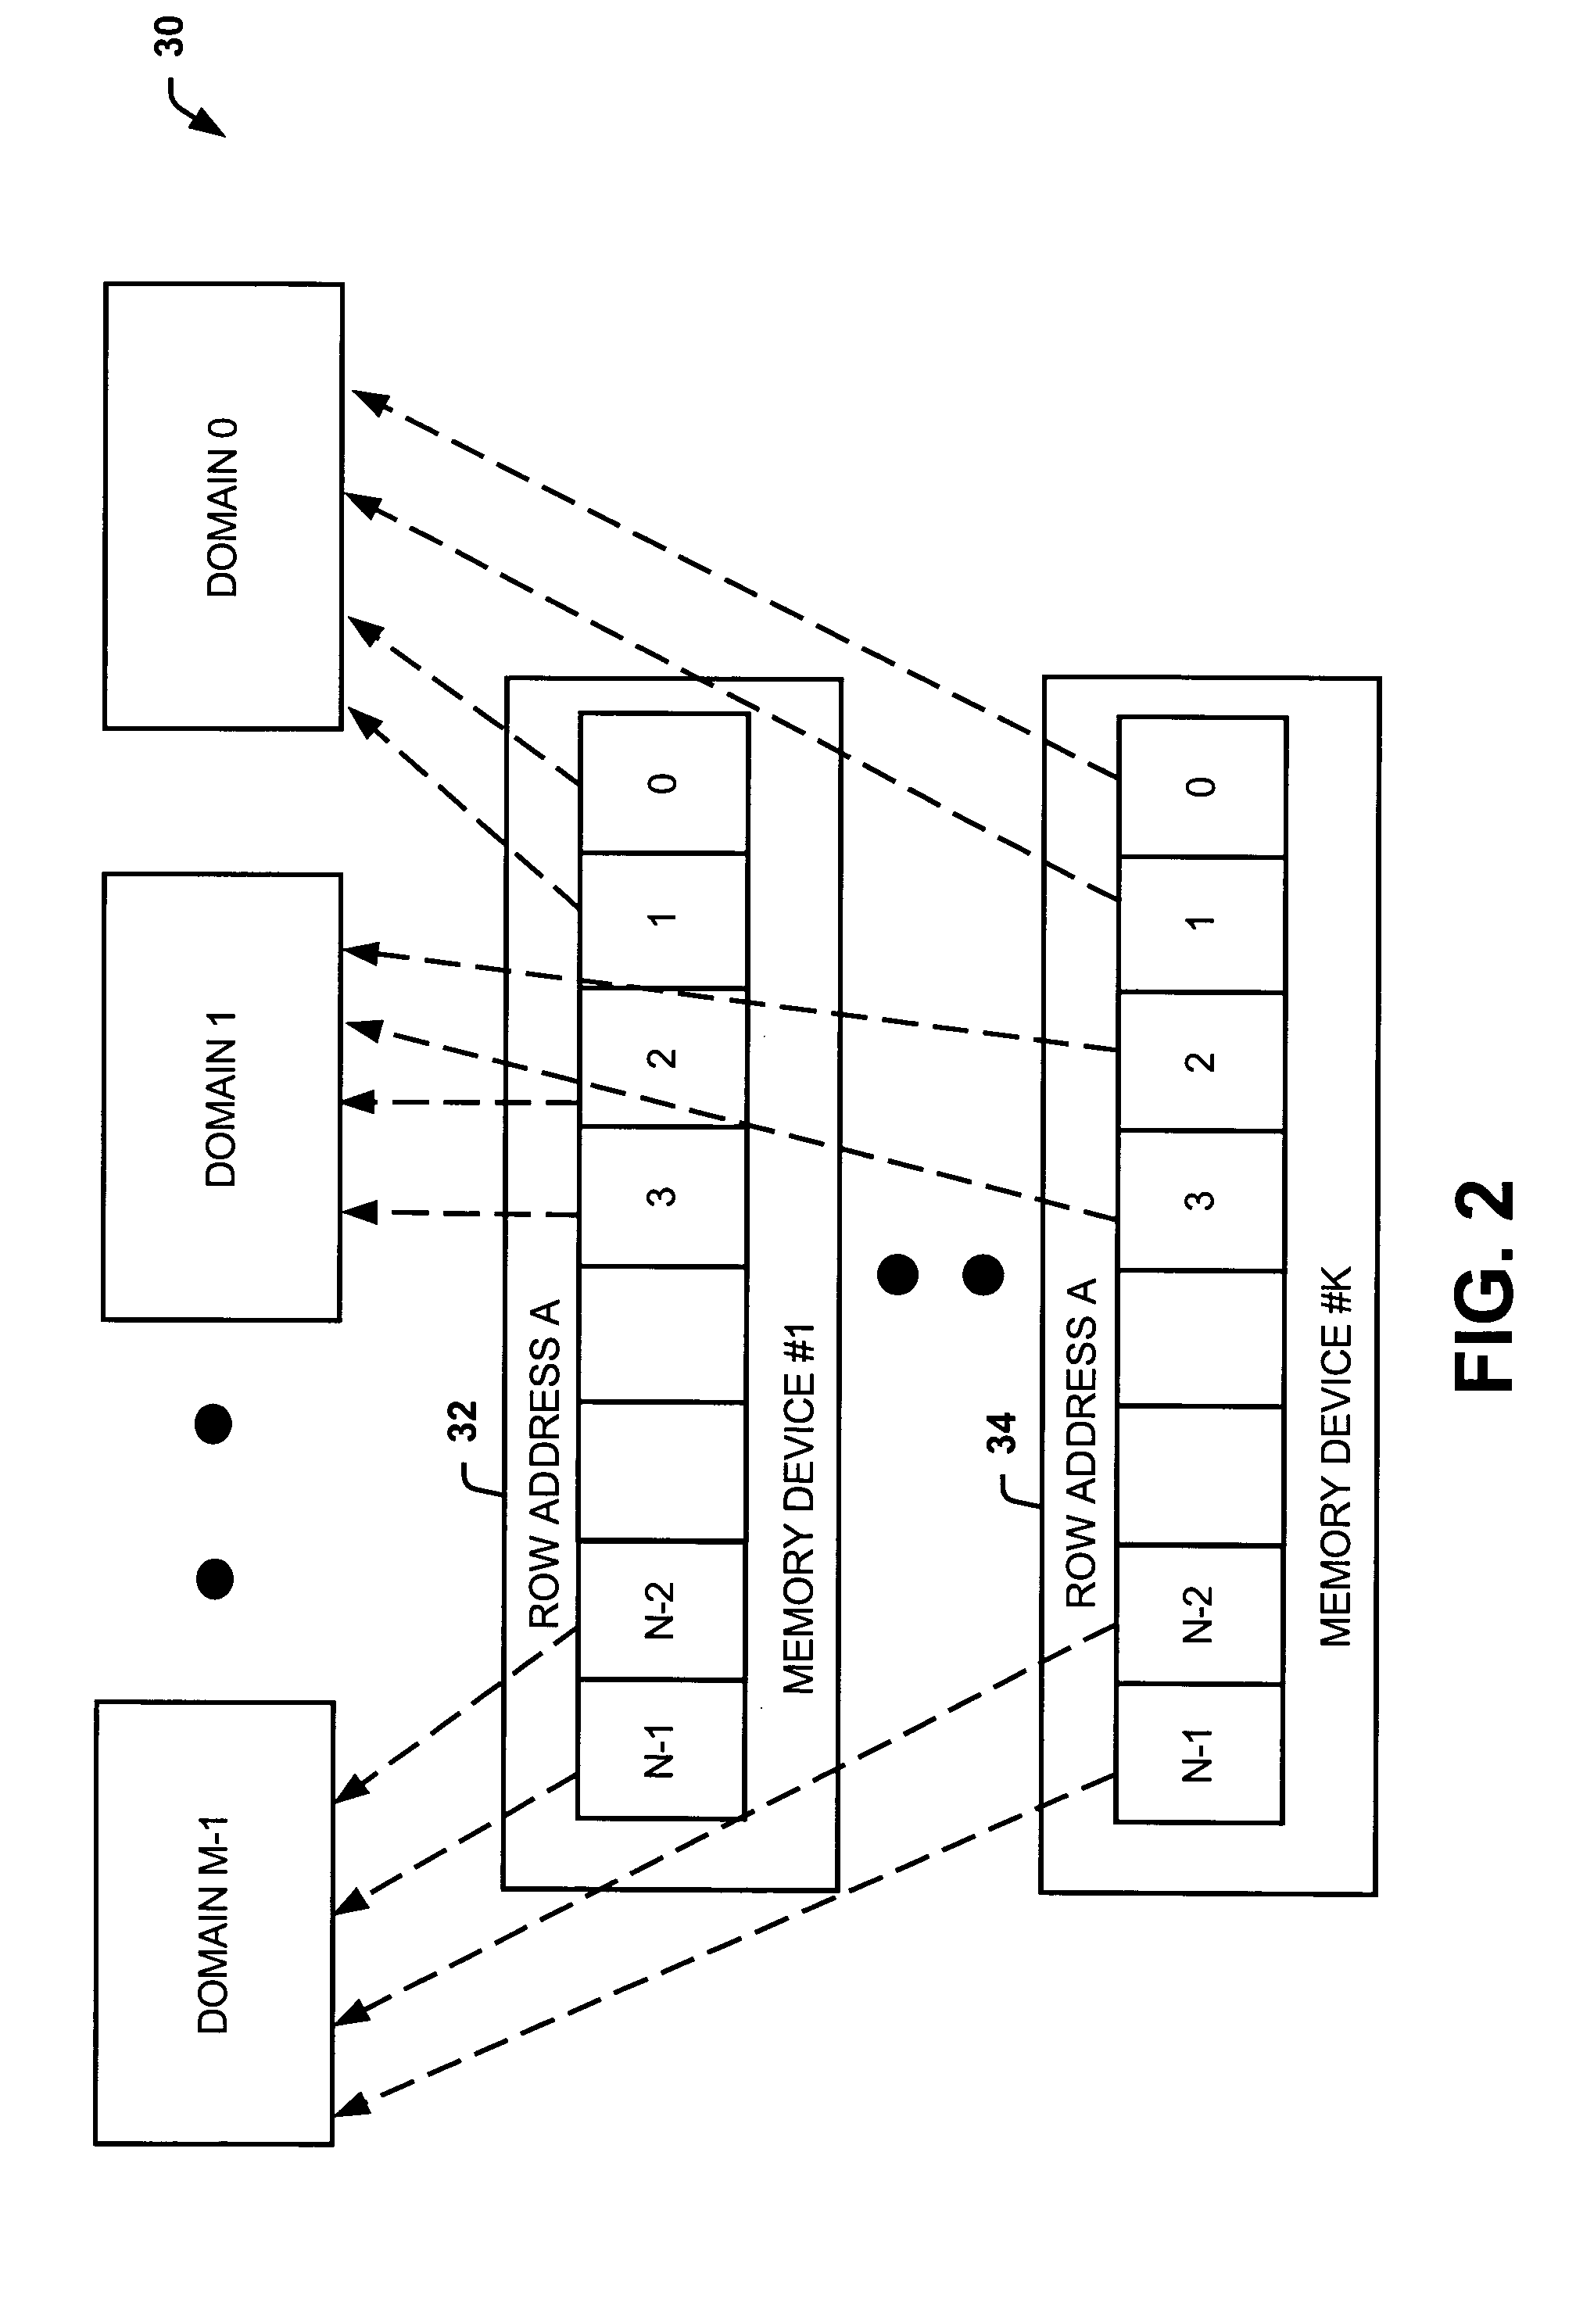 Systems and methods of routing data to facilitate error correction